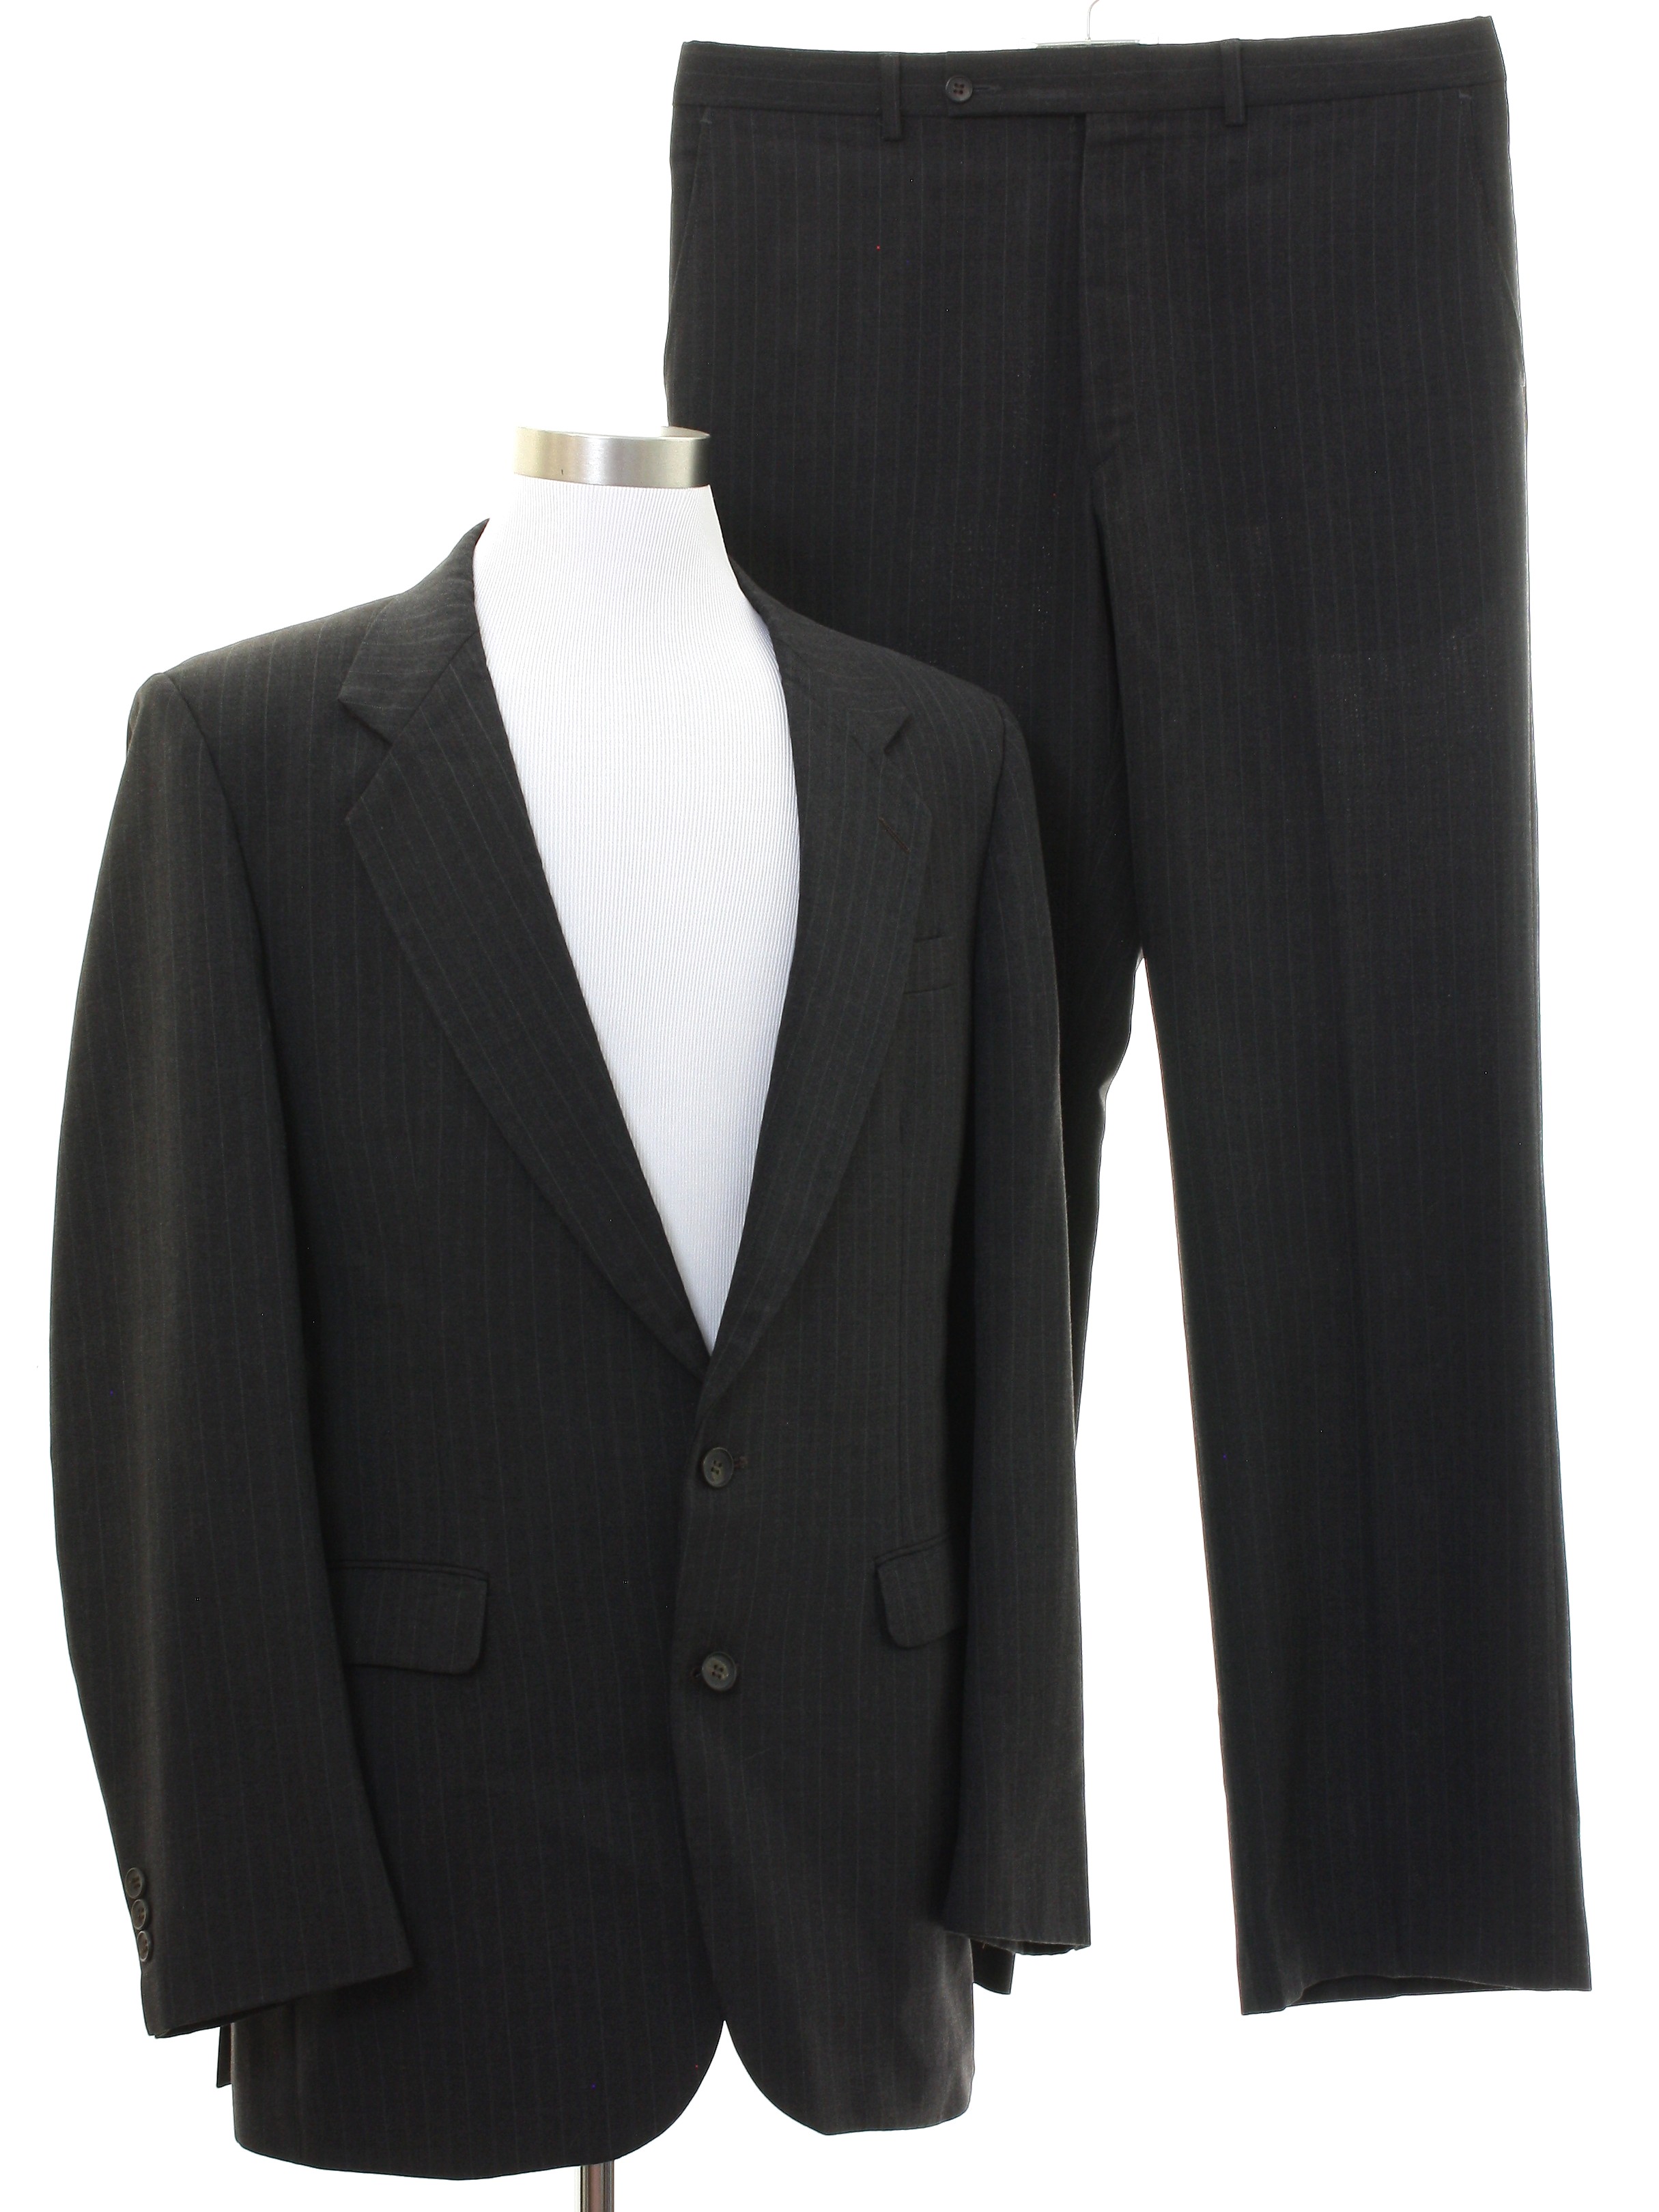 Gentry Seventies Vintage Suit: Late 70s or Early 80s -Gentry- Mens ...